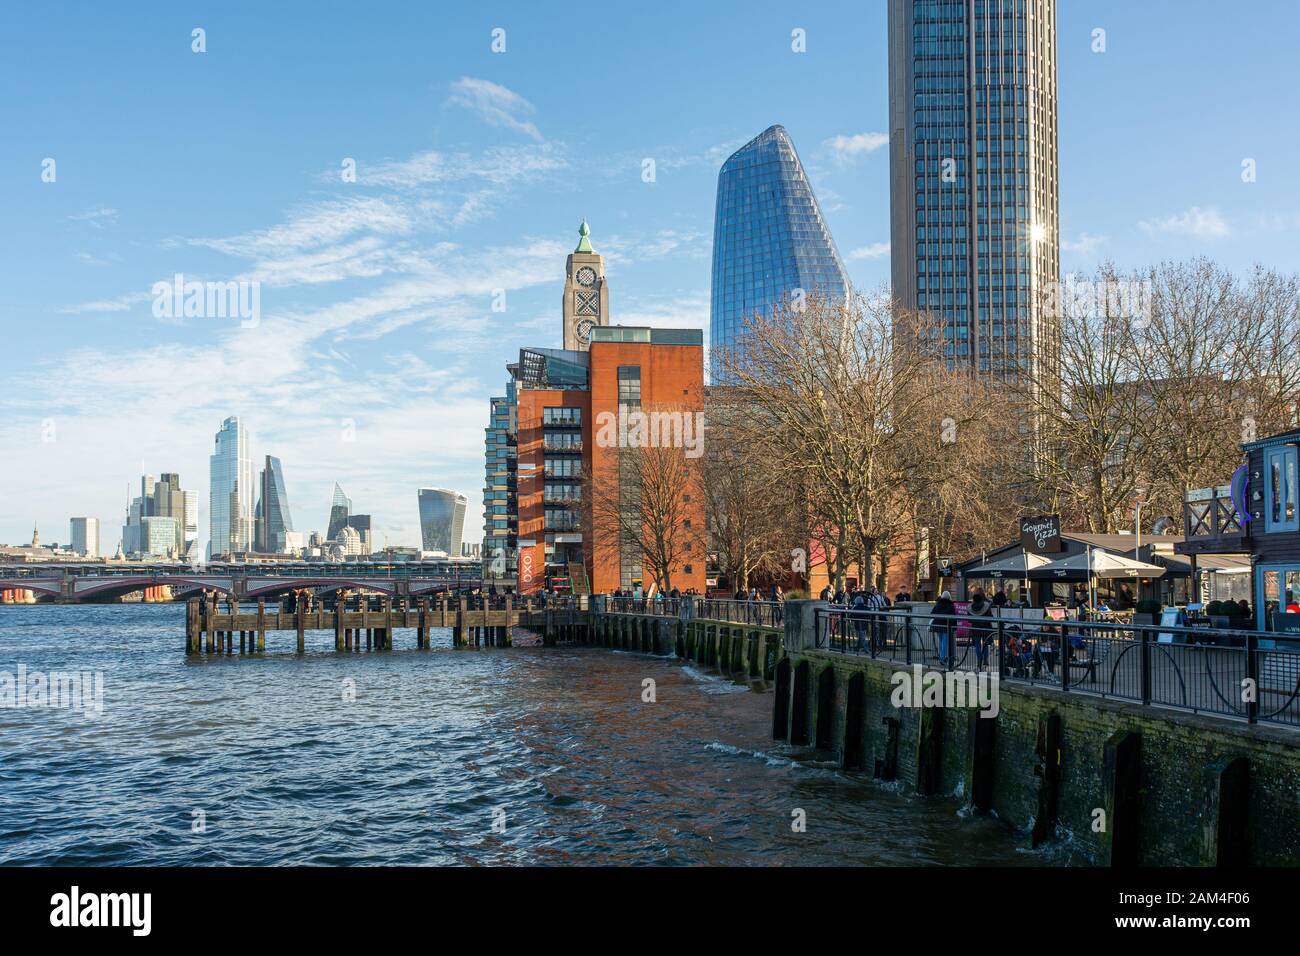 South Bank of the River Thames with the Oxo Tower Wharf, One Blackfriars and The South Bank Tower on a sunny winter day, London Stock Photo